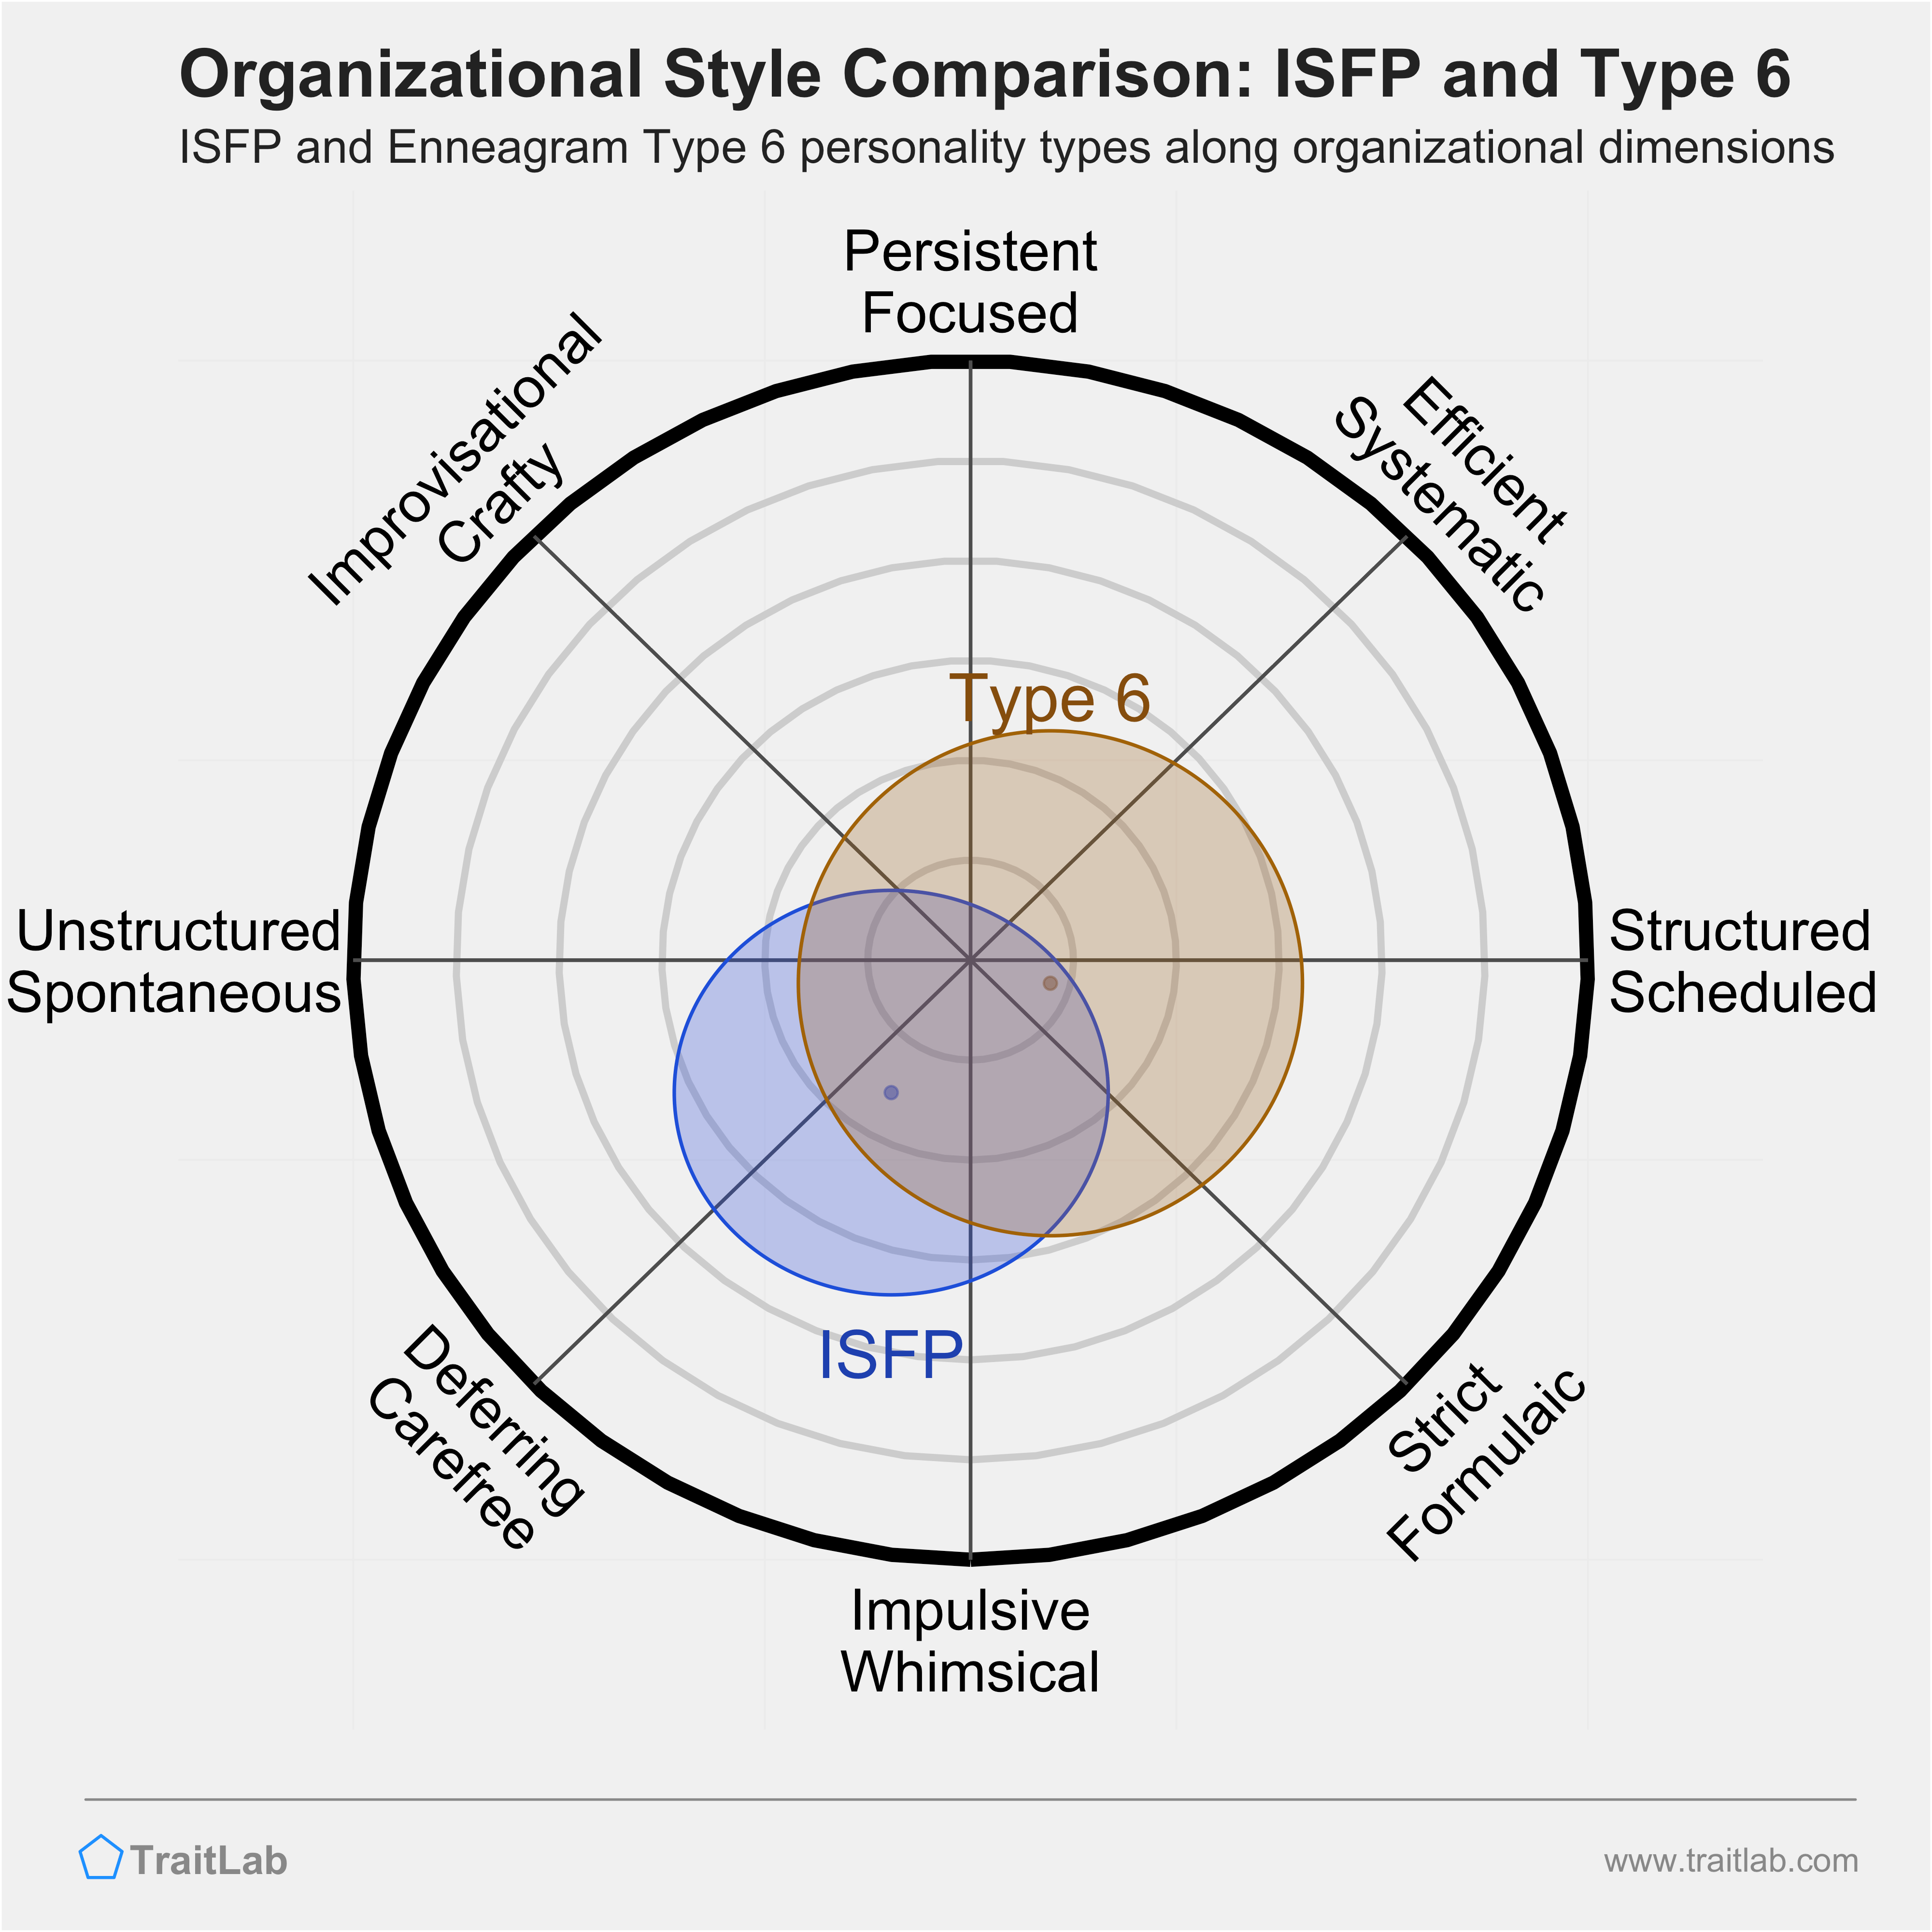 ISFP and Type 6 comparison across organizational dimensions